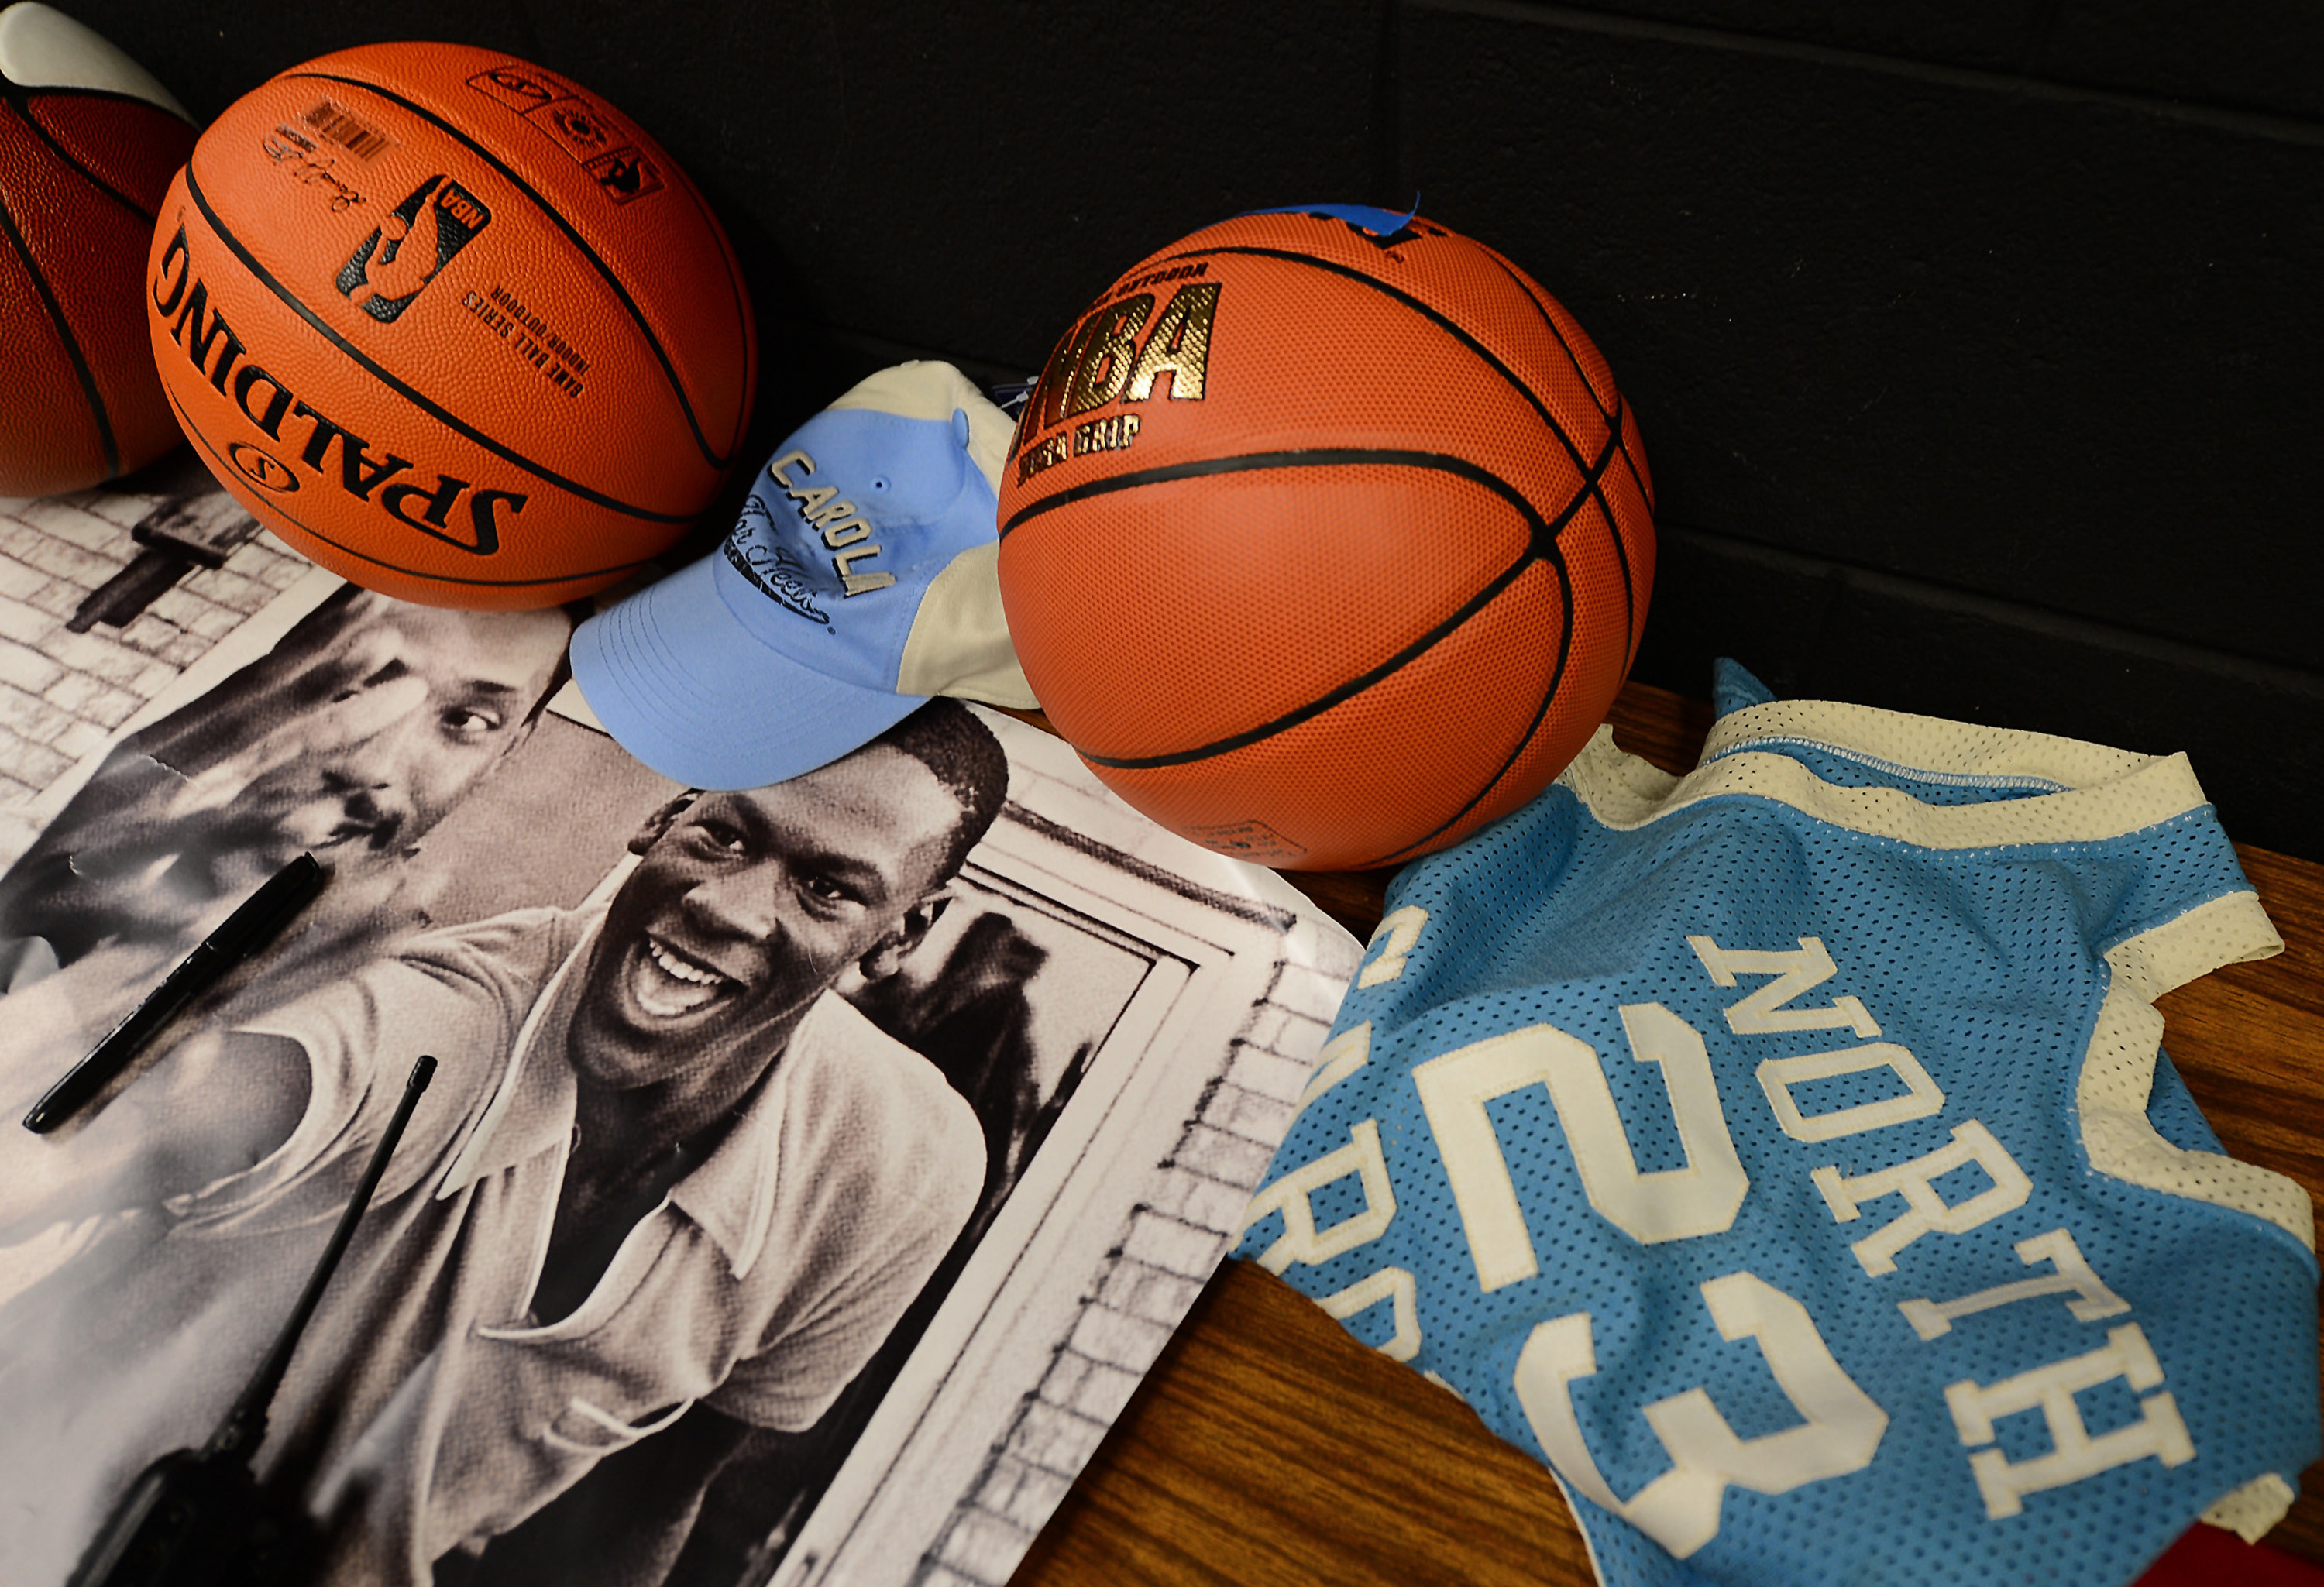 Michael Jordan Sets Another Record as His College Jersey Sells for $1.38 Million